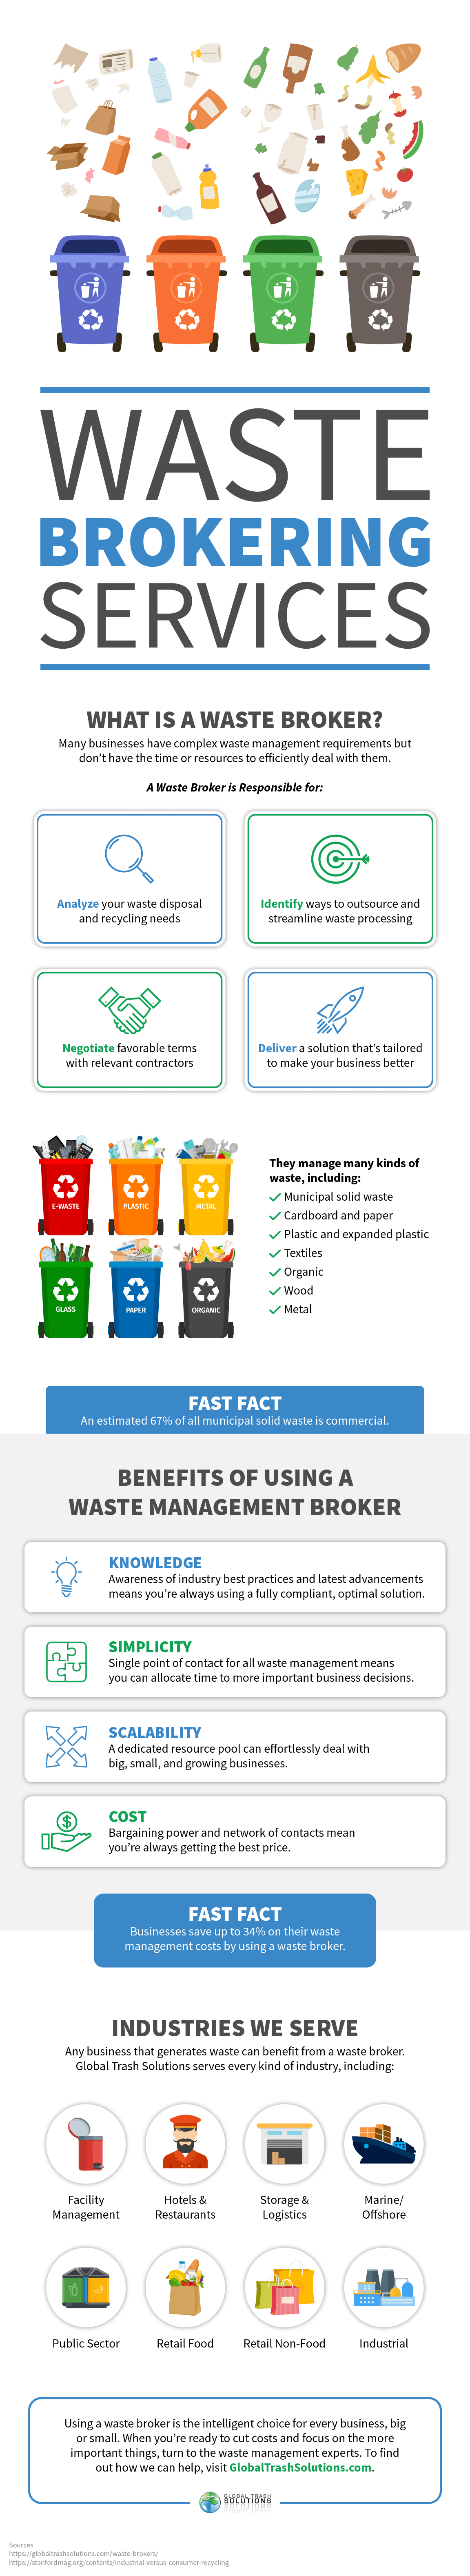 Waste Brokering Services Infographic